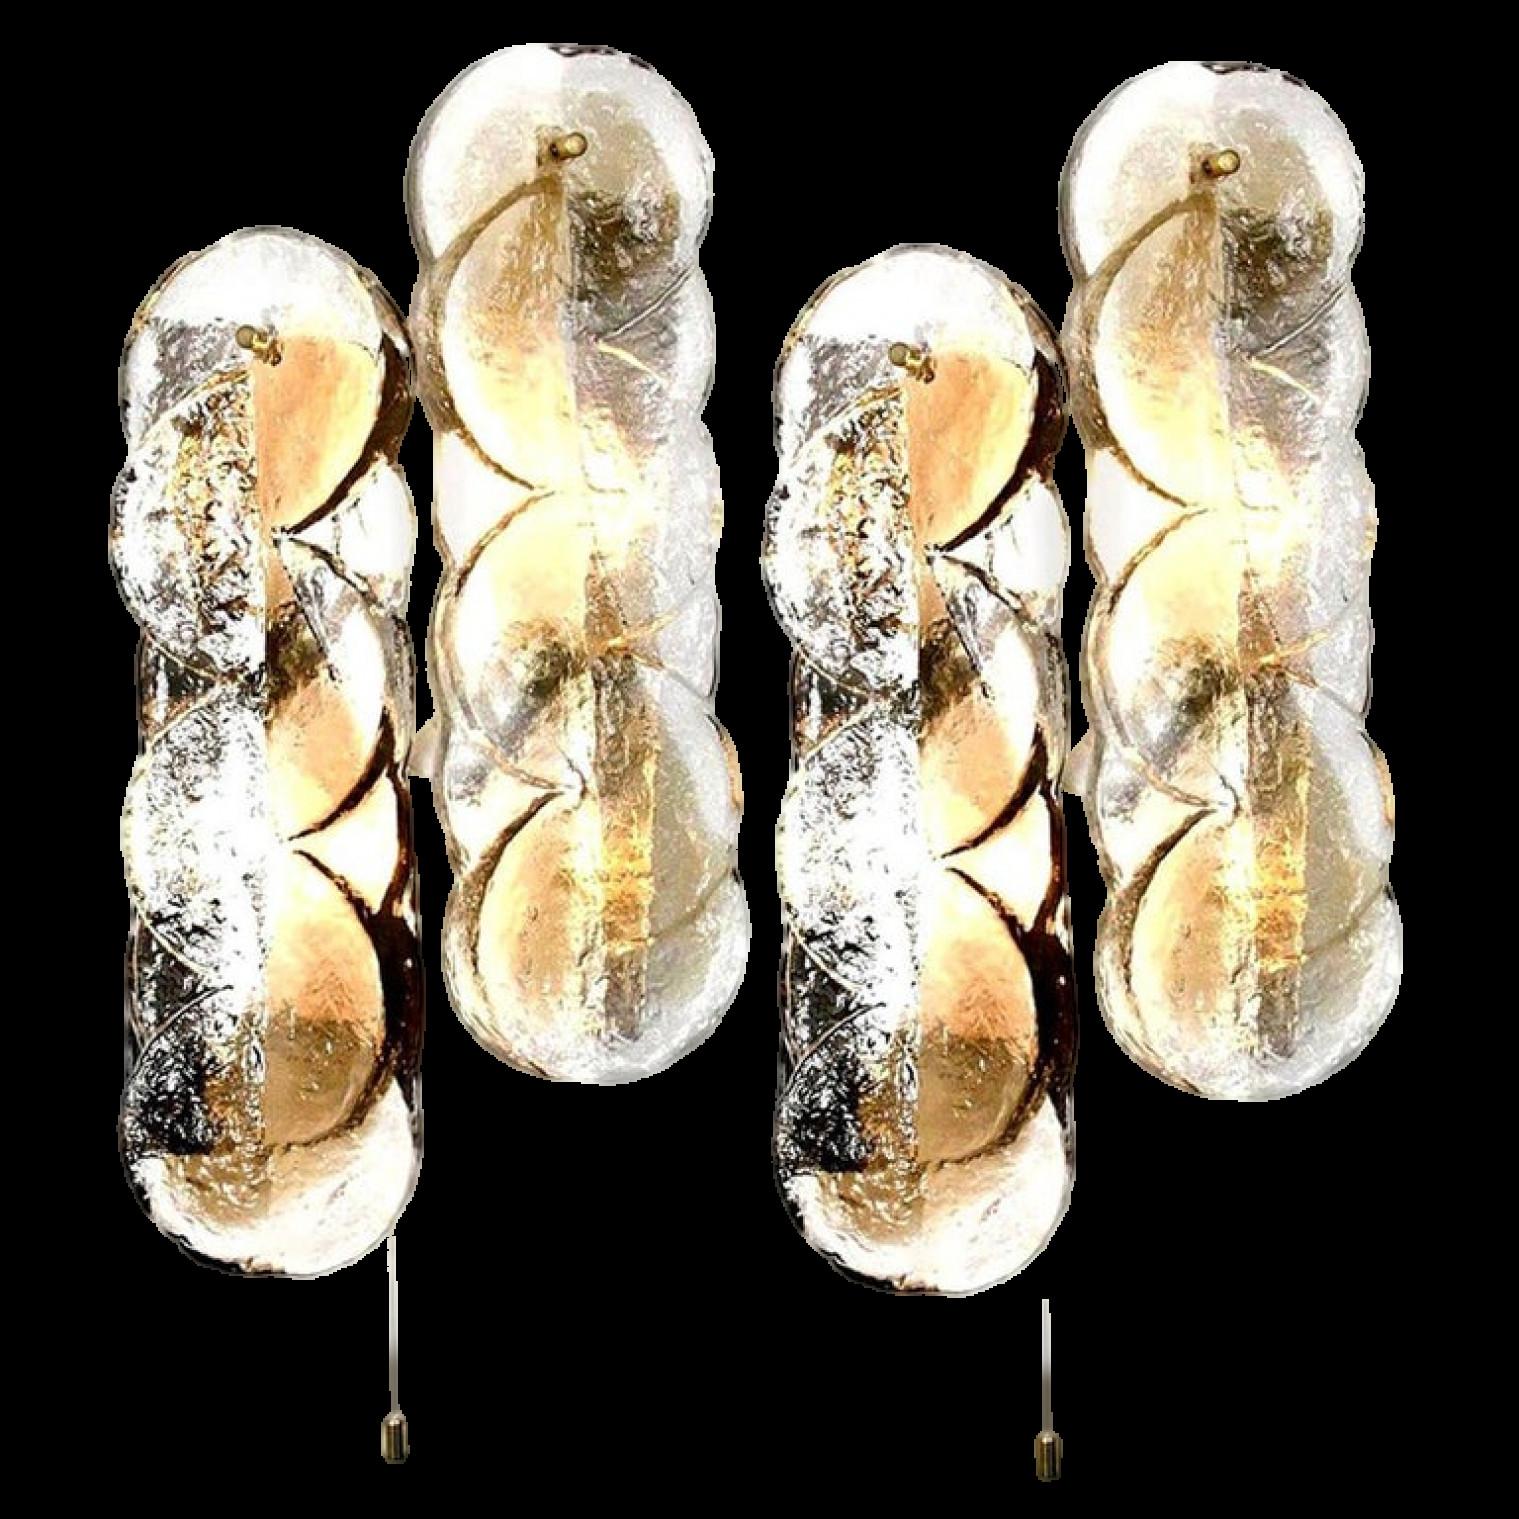 Pair of Kalmar swirl sconces with clear glass panels with light goldfish amber colored stripe in it. Beautiful, thick textured glass is complimented by white metal hardware. Beautiful brass knobs. In excellent condition.

Each sconces has two